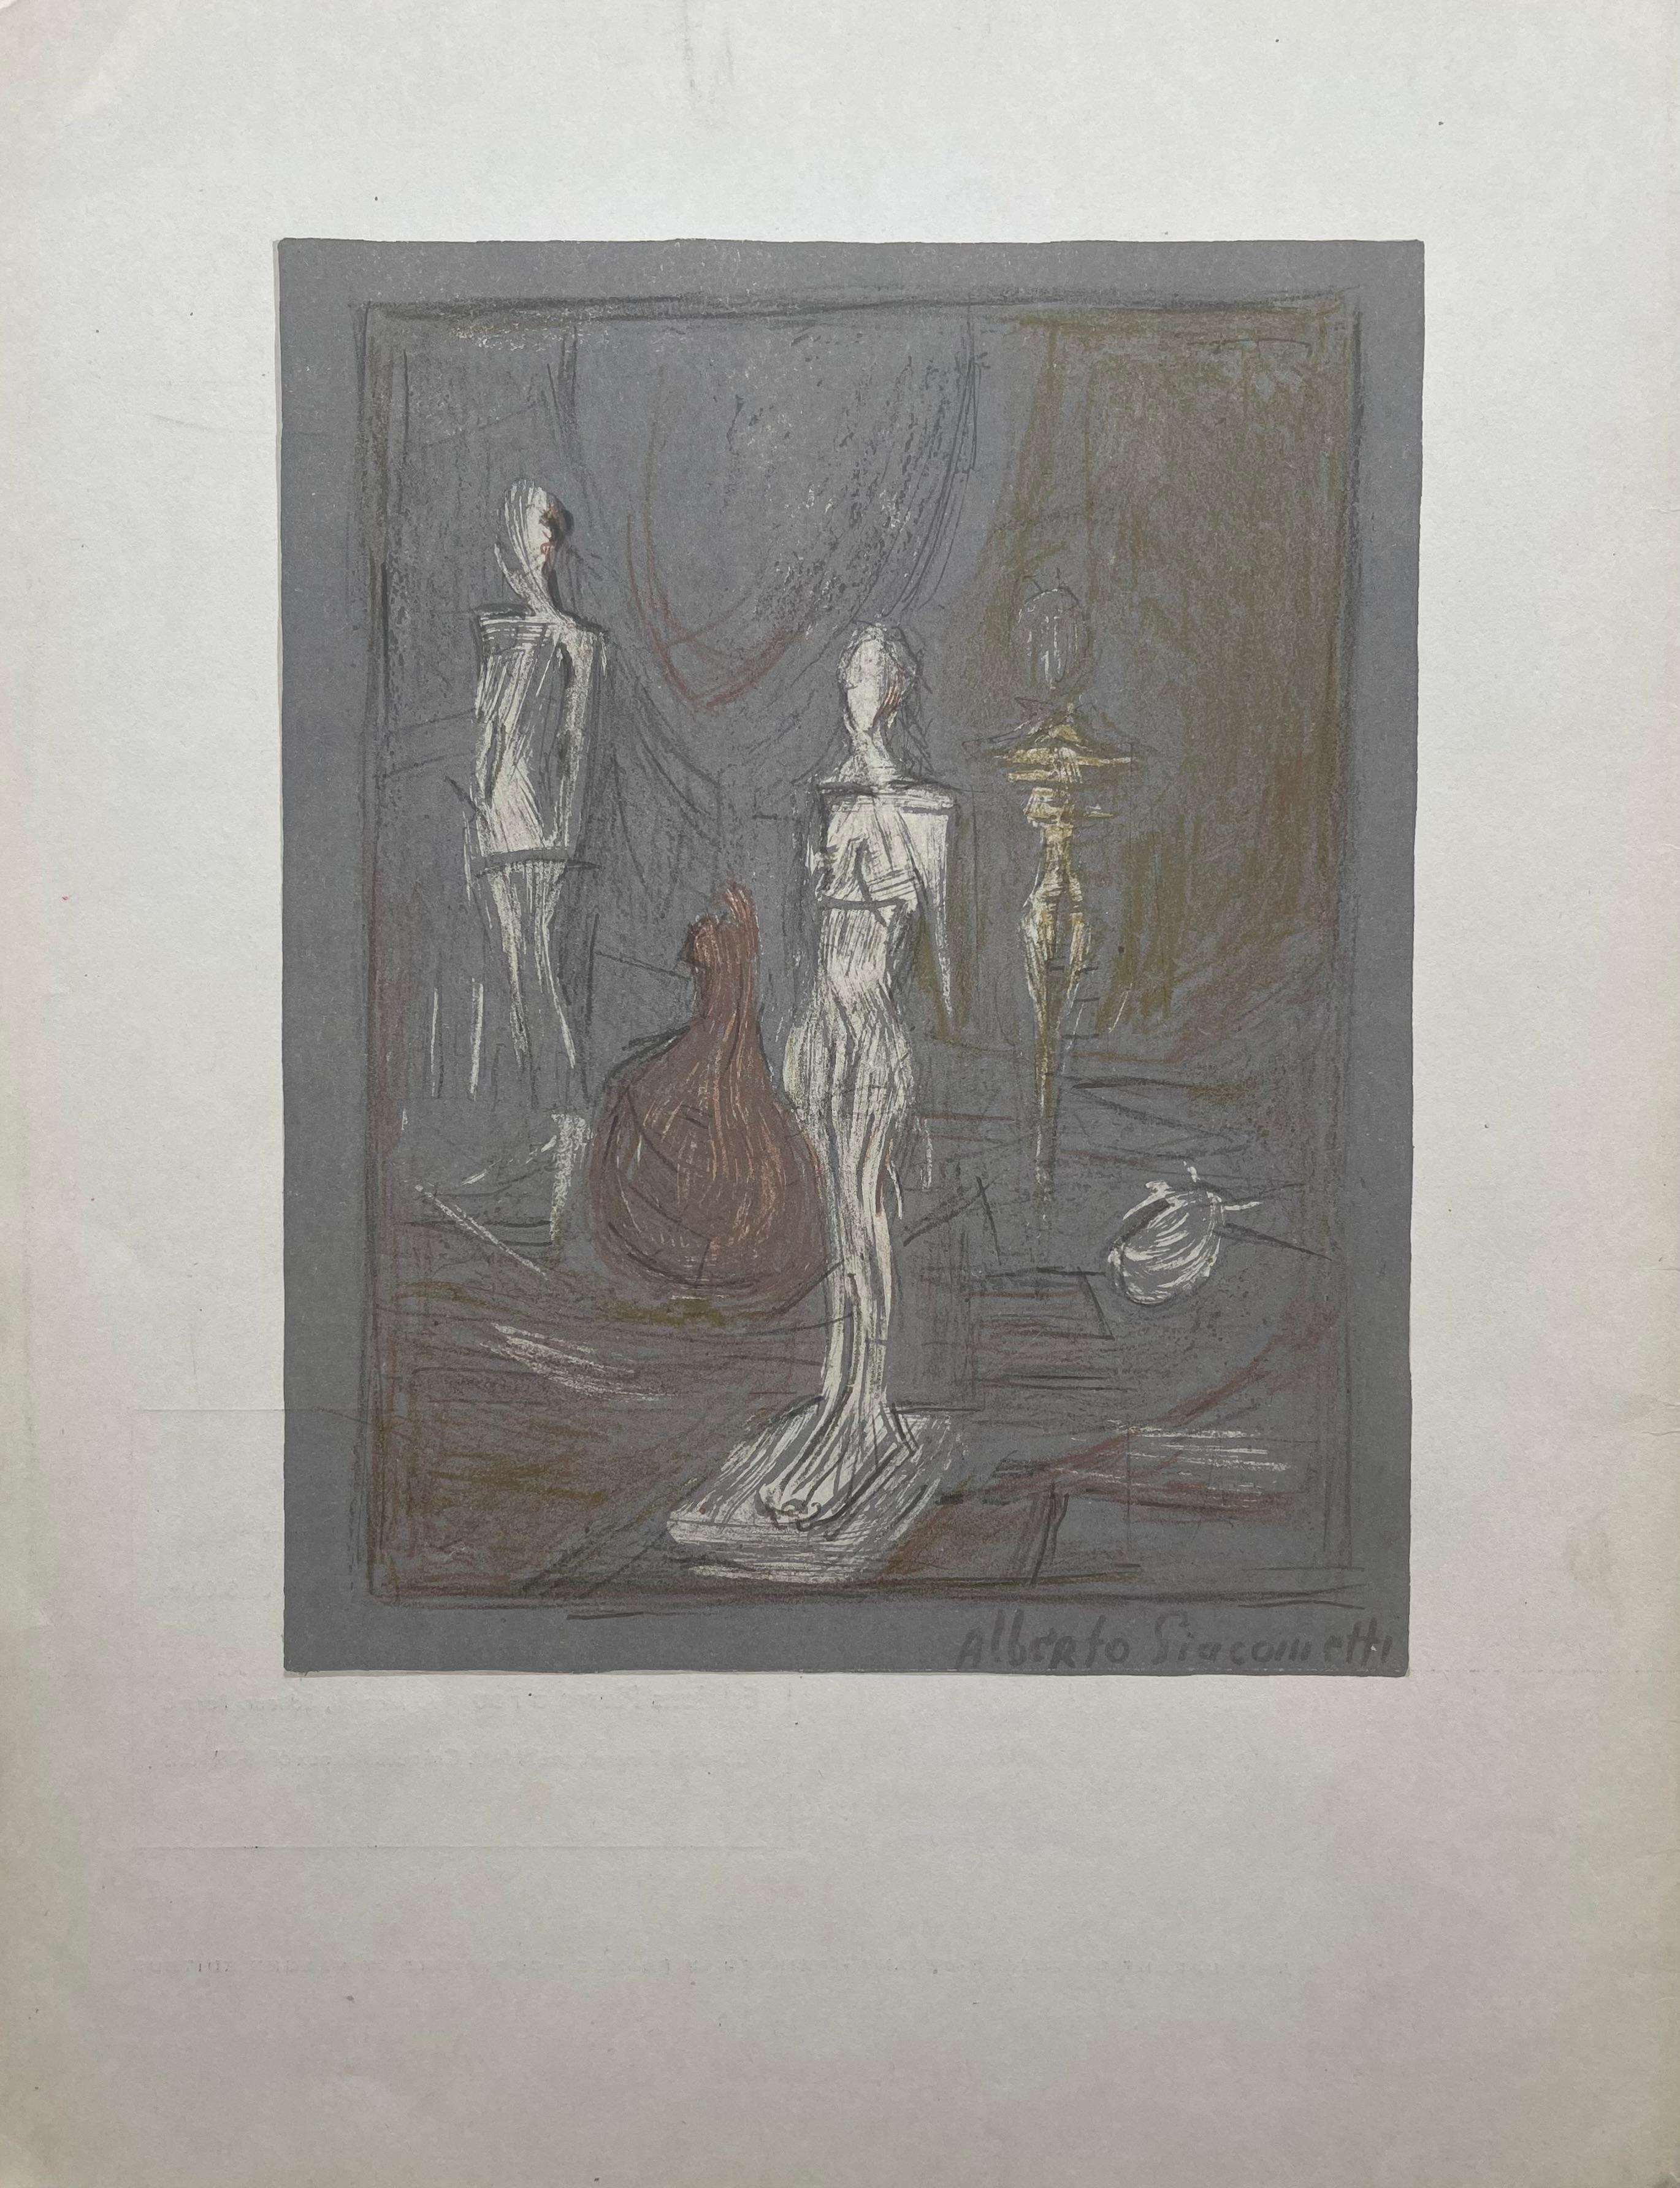 Lithograph on wove paper. Inscription: Unsigned and unnumbered. Good condition. Notes: From Derrière le miroir, N° 65, published by Aimé Maeght, Éditeur, Paris; printed by Éditions Pierre à Feu, Galerie Maeght, Paris, May 1954. Excerpted from a